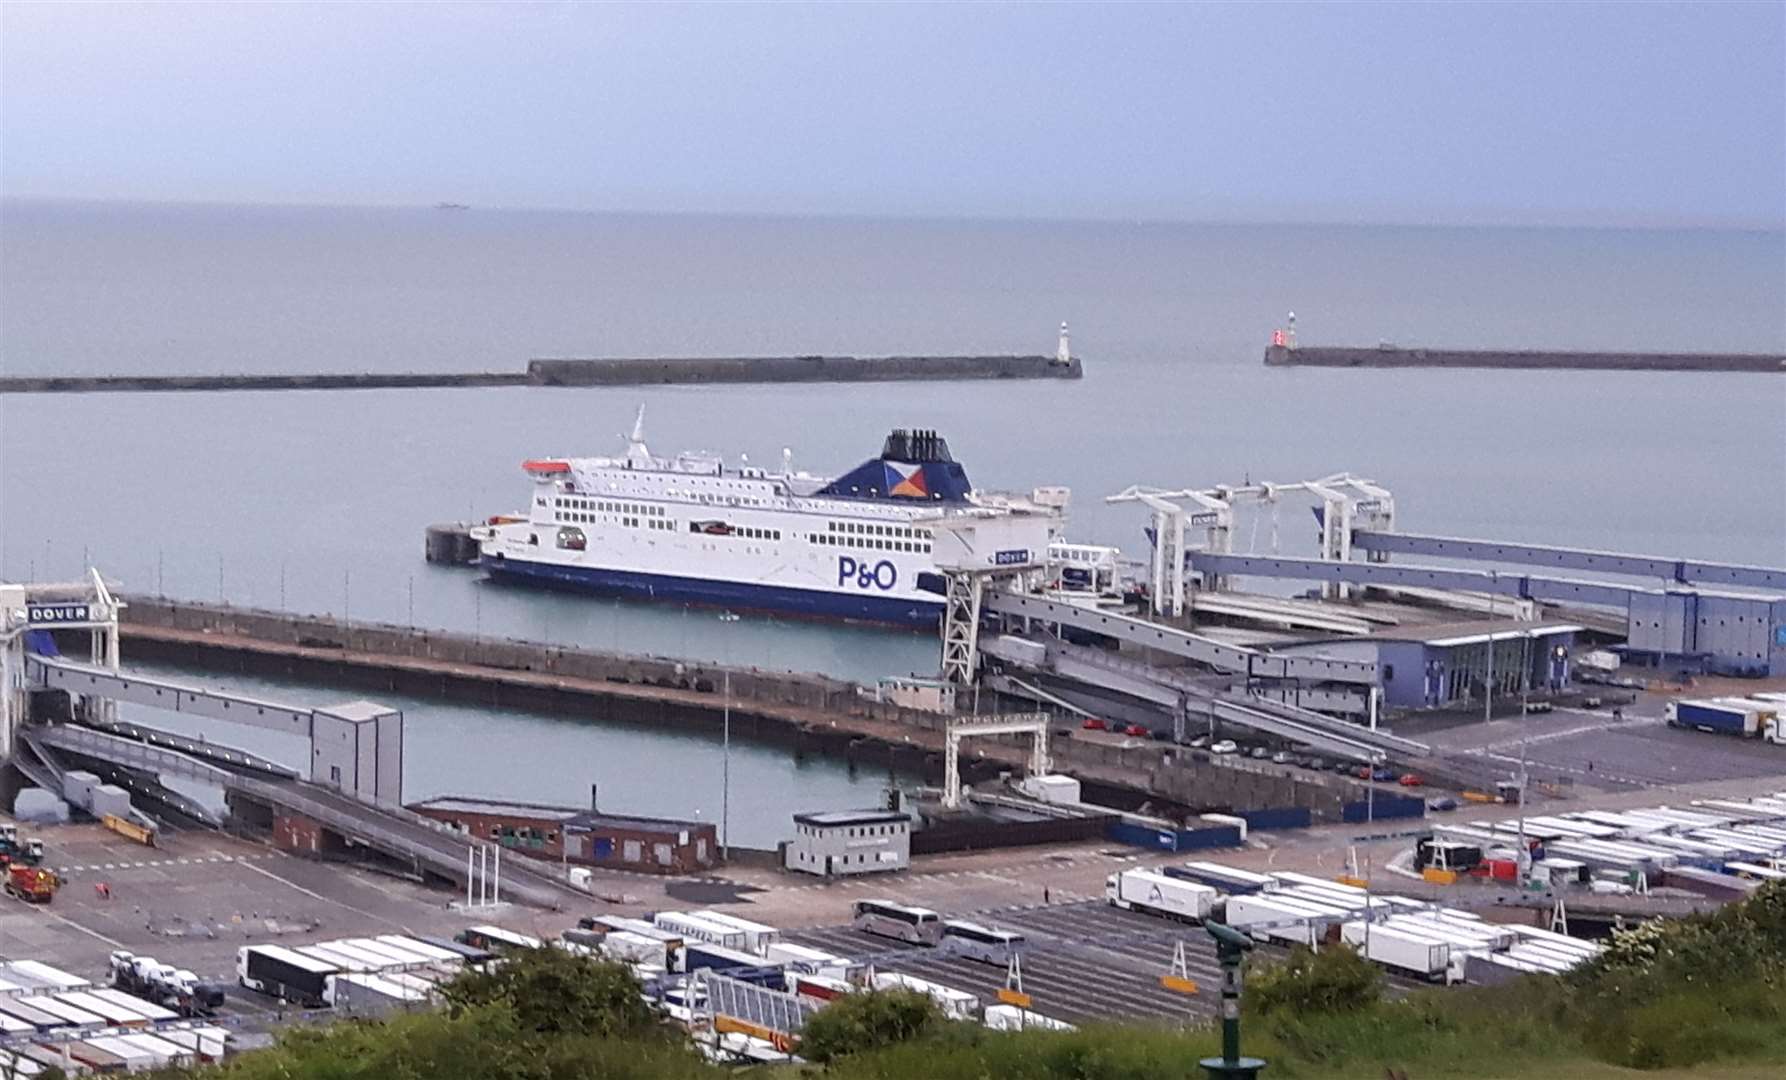 Denys Dovhan's illegal 'cargo' was discovered as he arrived at Dover docks